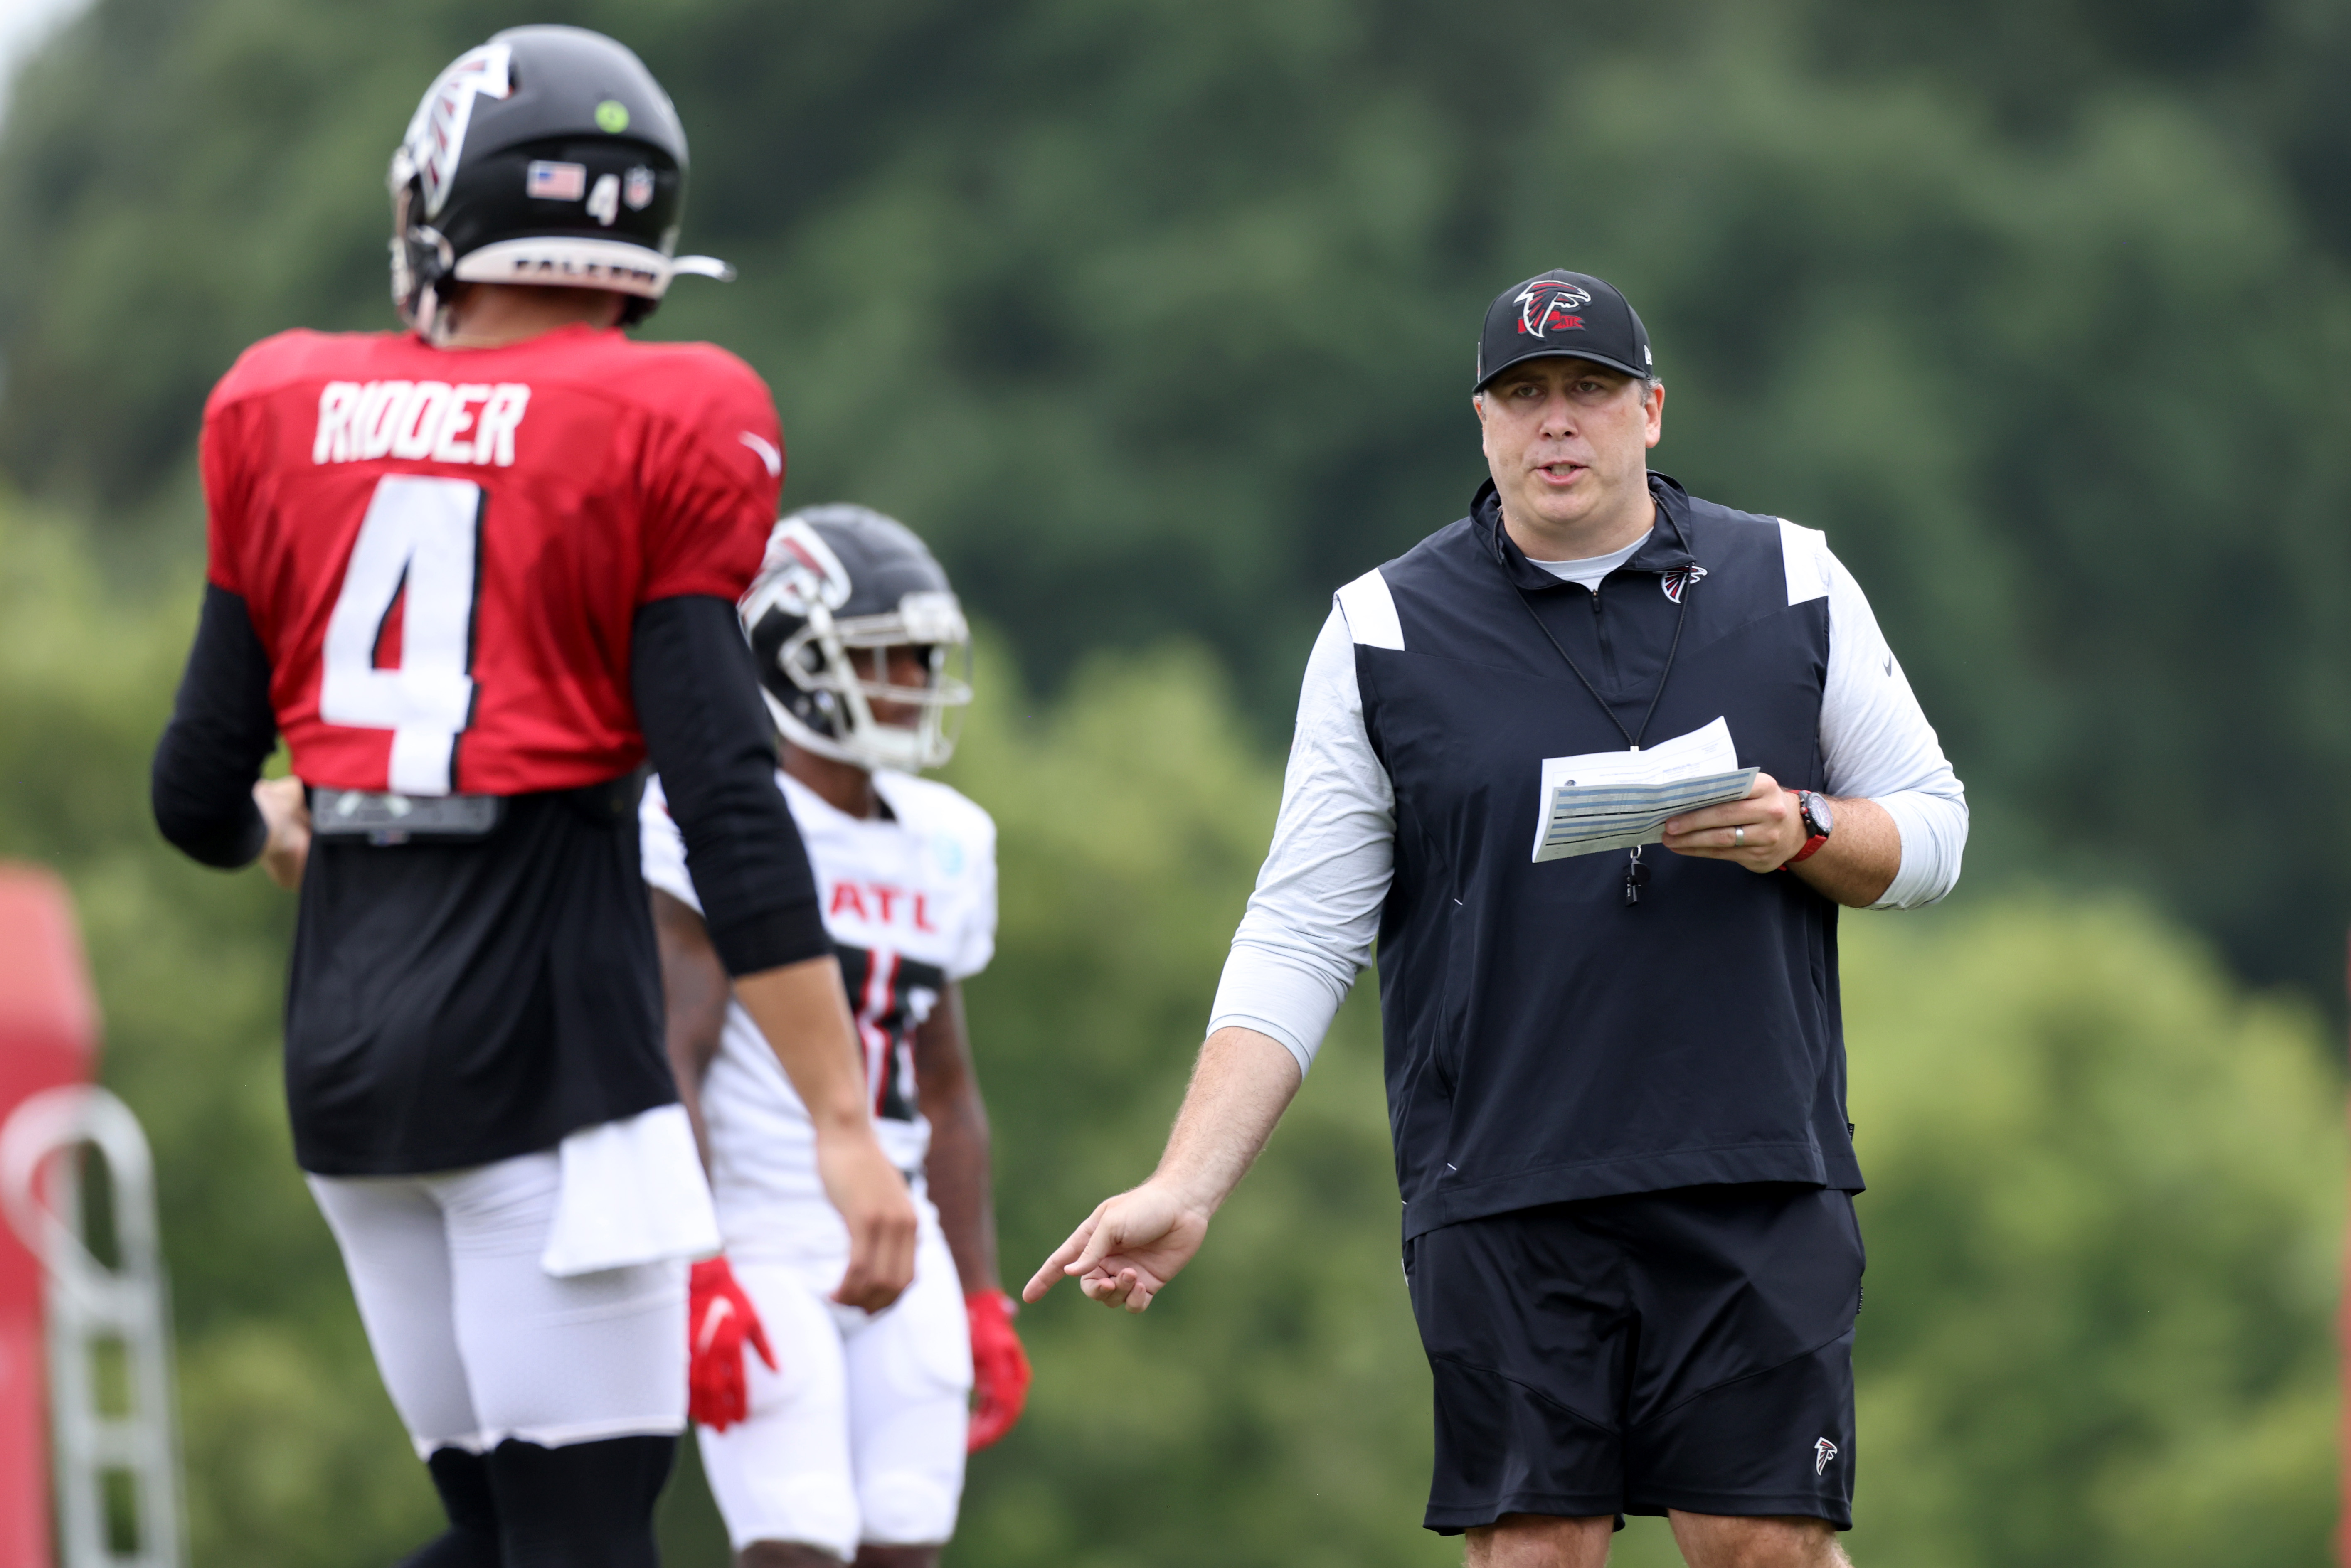 Bradley's Buzz: The Falcons had to give Desmond Ridder a look